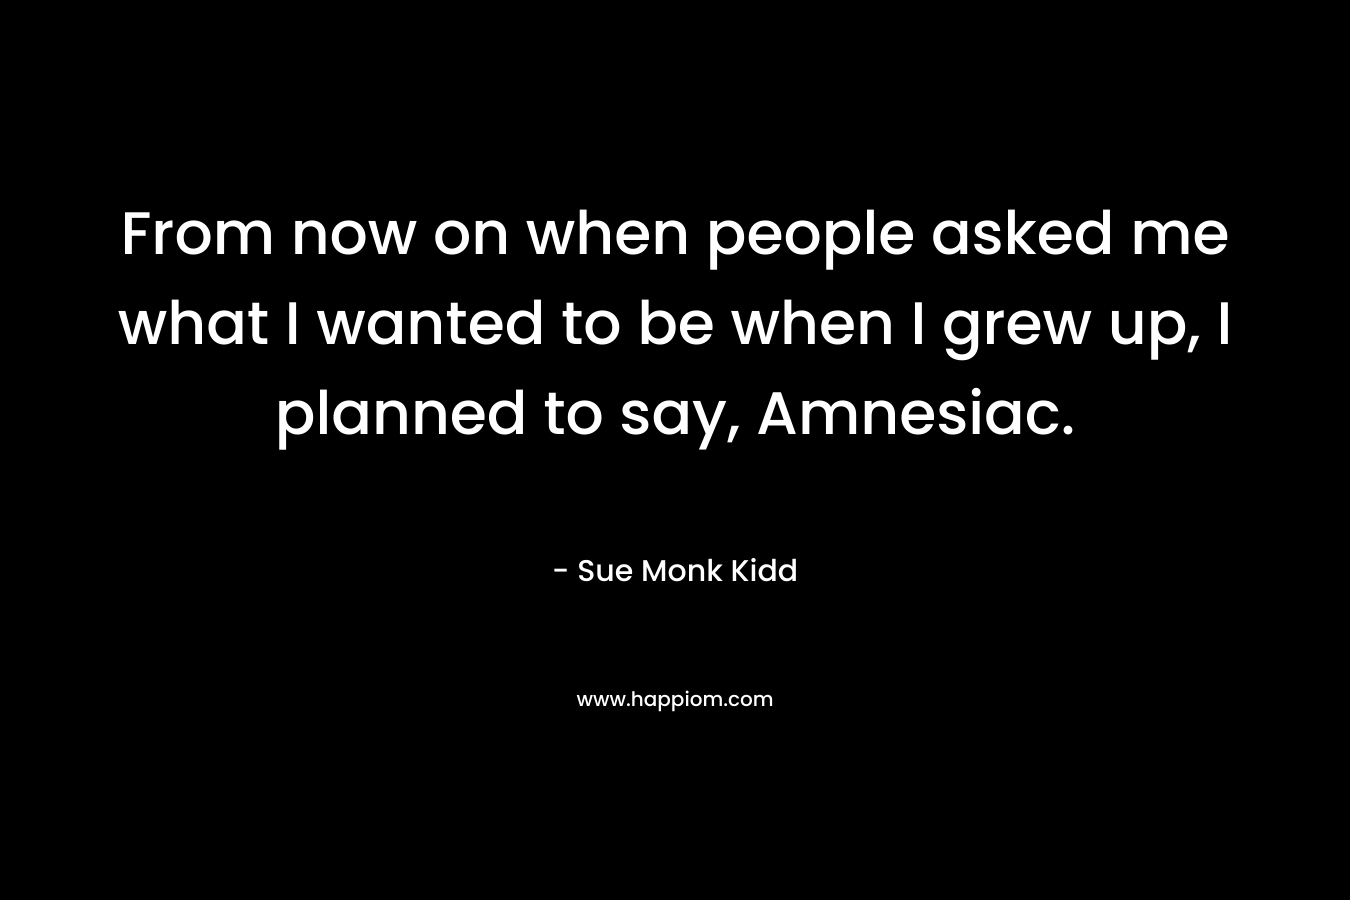 From now on when people asked me what I wanted to be when I grew up, I planned to say, Amnesiac. – Sue Monk Kidd